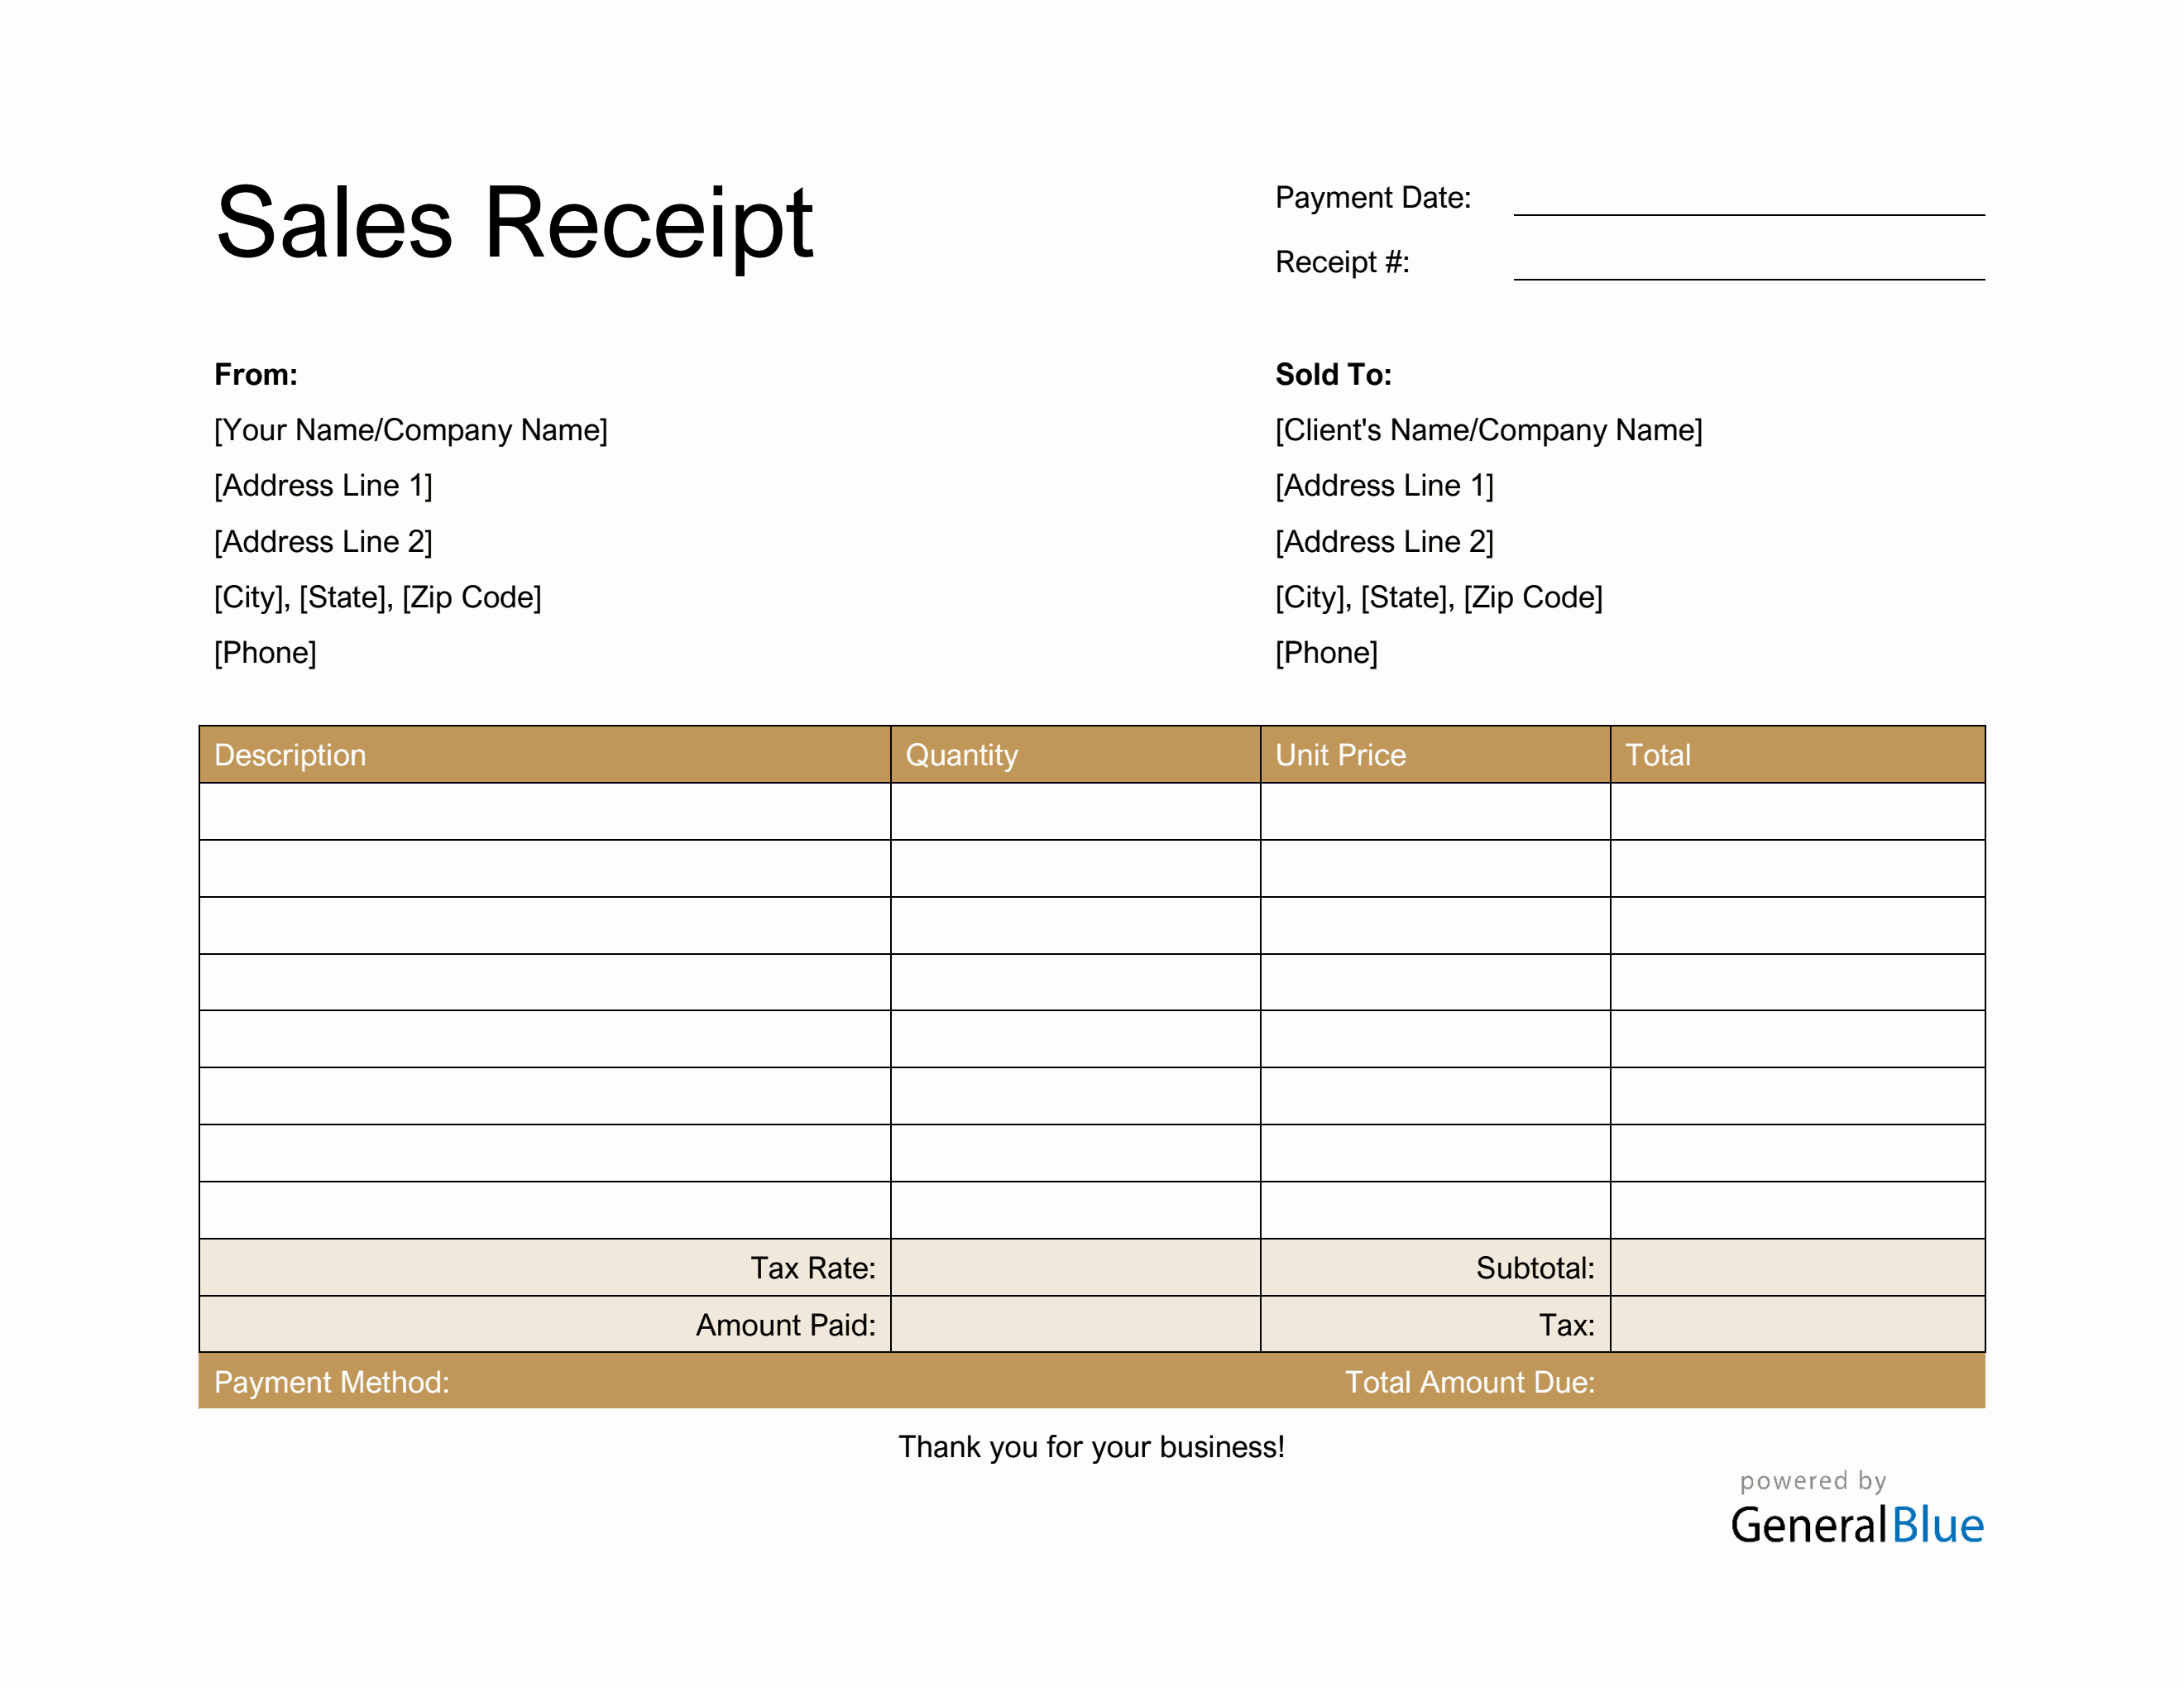 sales-receipt-template-in-word-basic